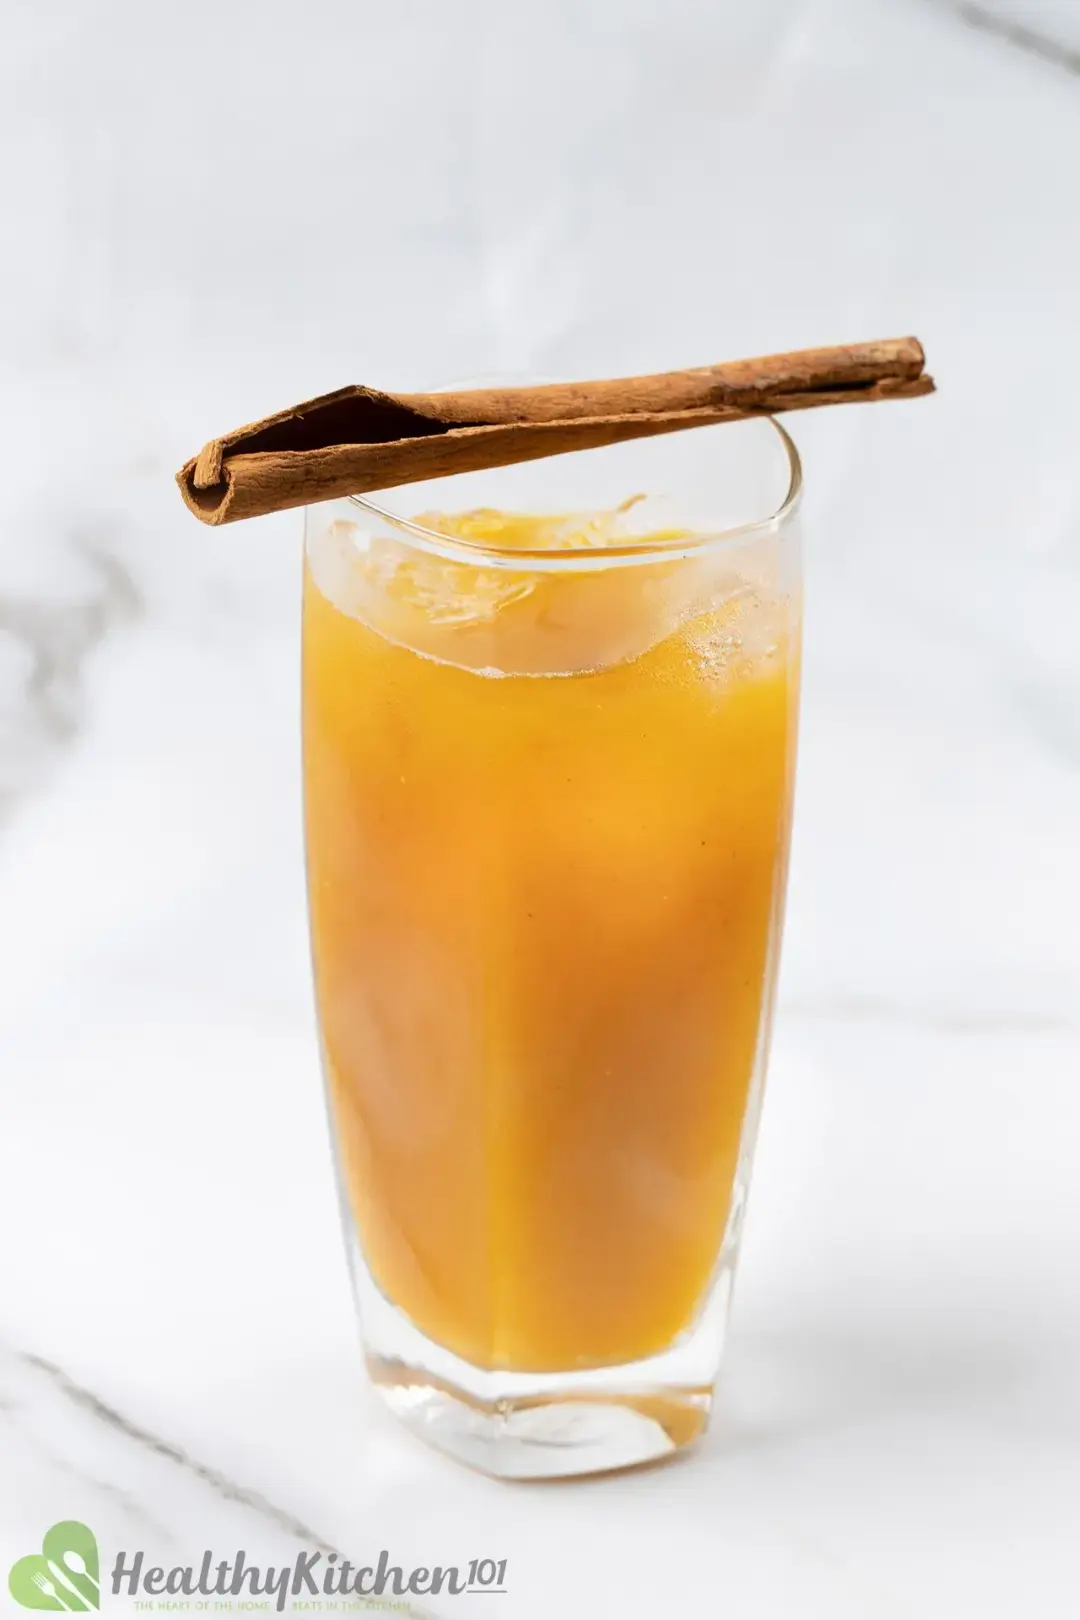 A glass of iced pumpkin juice with a cinnamon stick on top